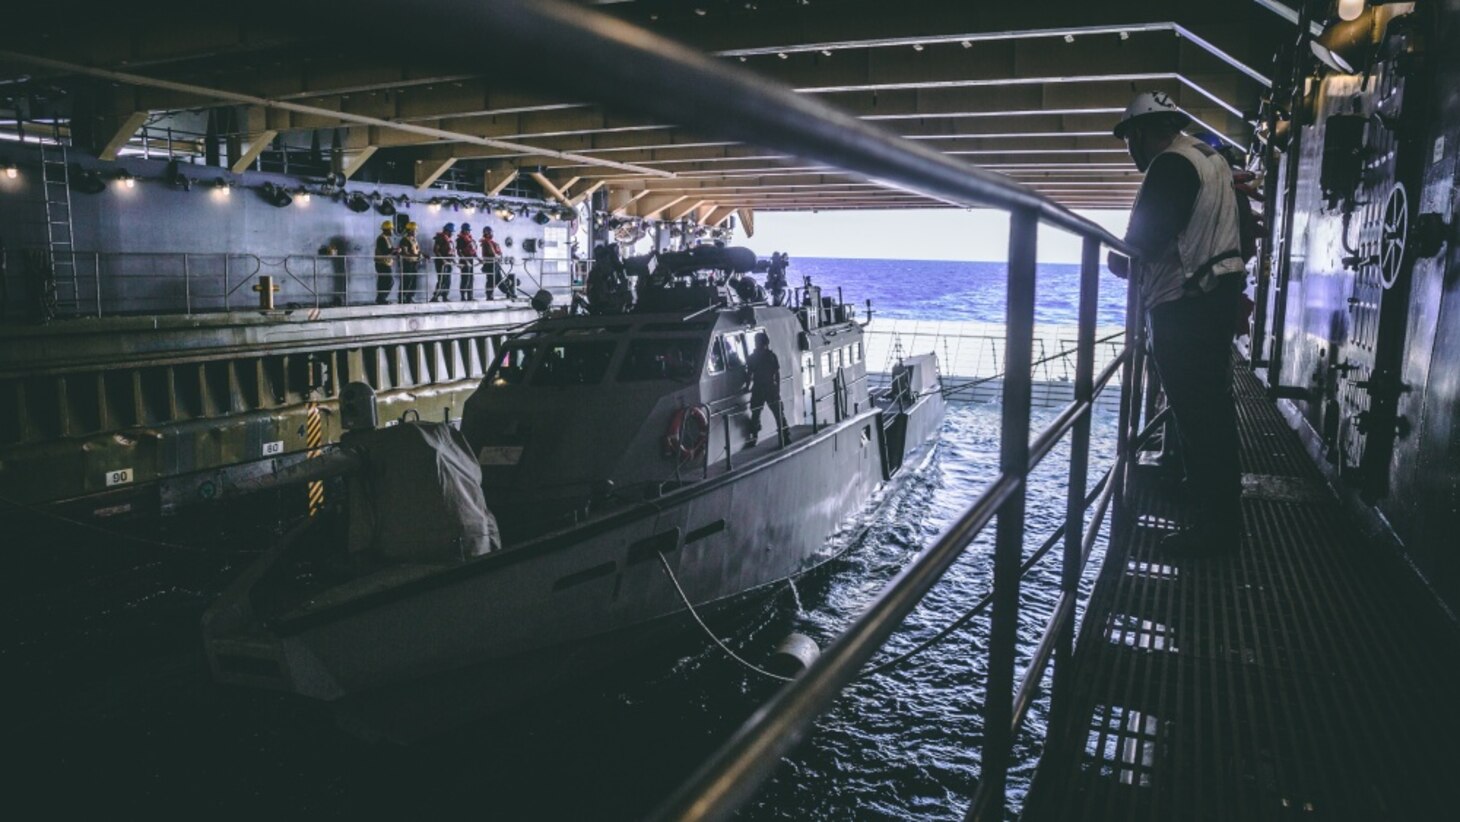 U.S. Sailor assigned to amphibious dock landing ship USS Comstock (LSD 45), observes a Patrol Boat (PB) Mk VI assigned to Maritime Expeditionary Security Squadron 3 during green well operations, Oct. 4, 2020. Maritime Expeditionary Security Force and Explosive Ordnance Disposal Mobile Unit Sailors assigned to Commander, Task Force 75 (CTF 75) embarked and are conducting integrated littoral maritime security operations from the amphibious dock landing ship USS Comstock (LSD 45) with the Marines and Sailors already deployed as Task Force Ellis from I Marine Expeditionary Force. PB Mk VI provides increased capabilities to amphibious warships and can operate directly in support of the Navy platform or independently in support of mission tasking. (U.S. Marine Corps photo by Sgt. Manuel A. Serrano)